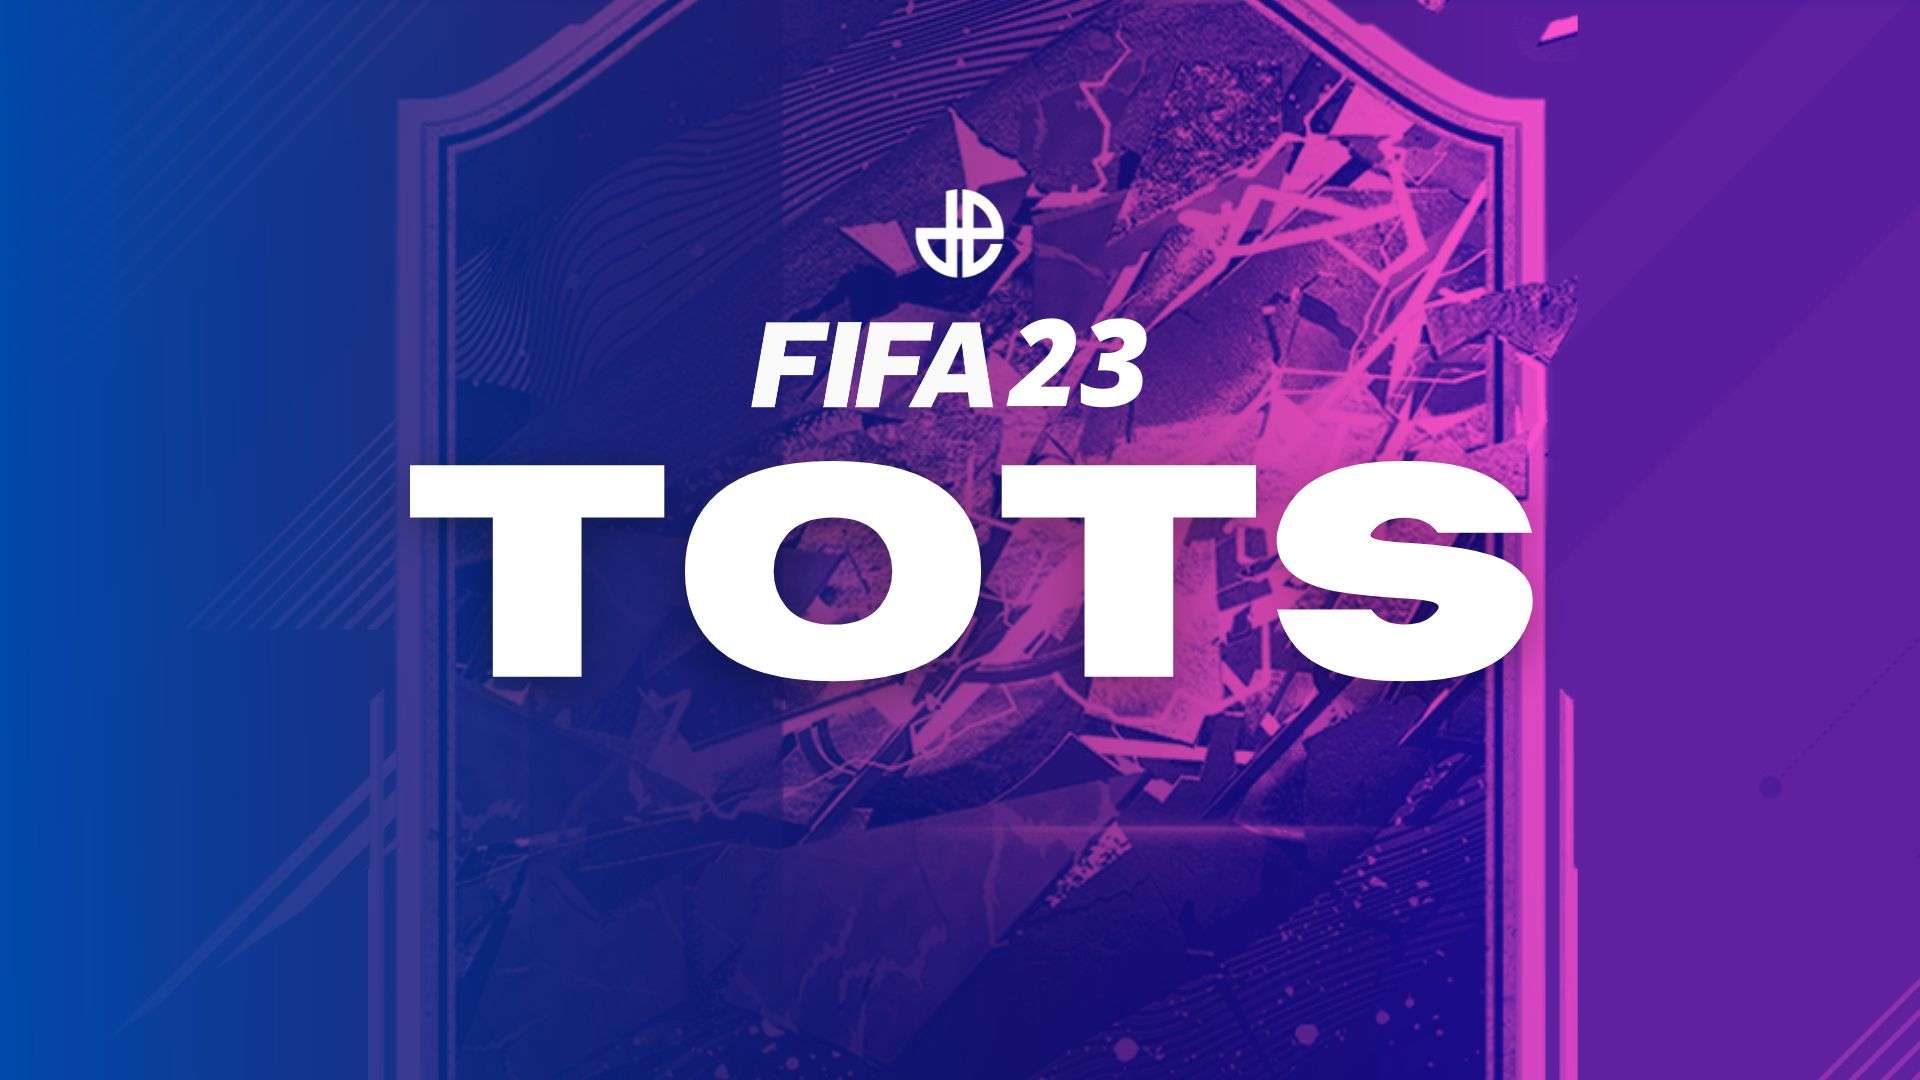 FIFA 23 Team of the Season graphic and card